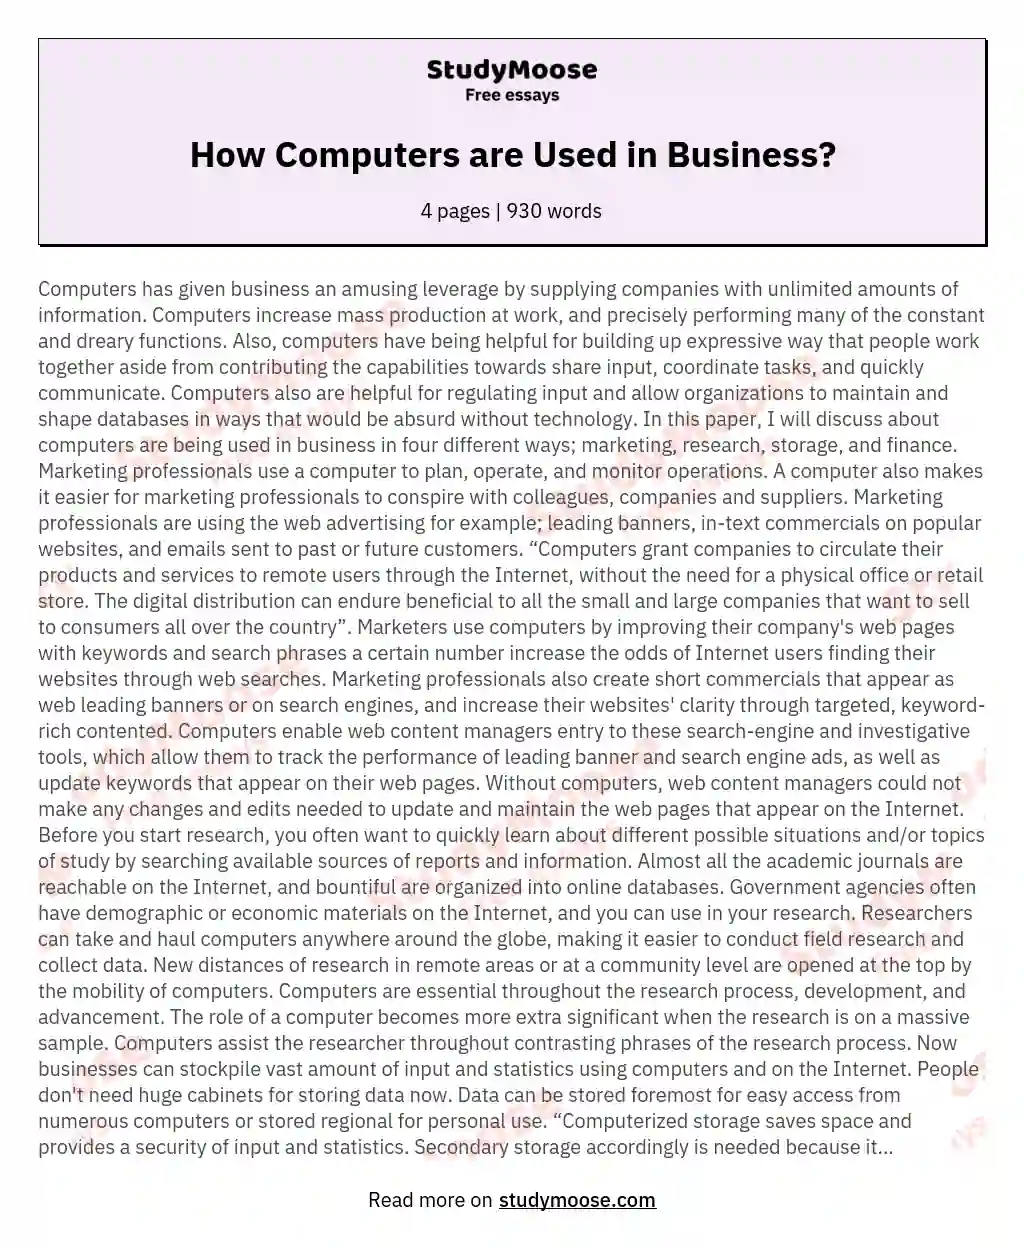 How Computers are Used in Business? essay